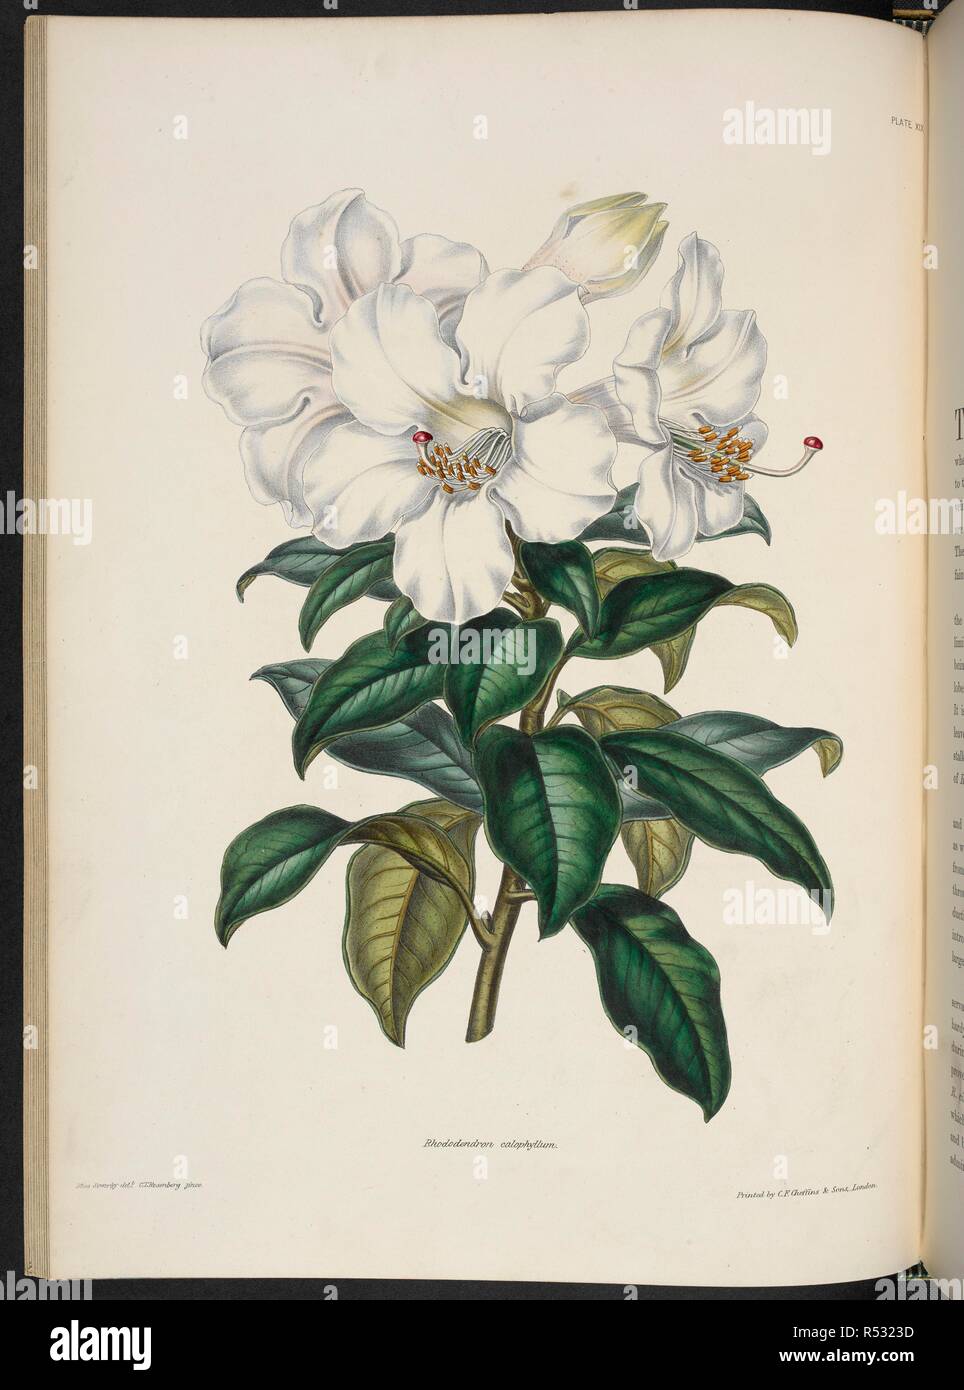 Rhododendron calophyllum (Nuttall.). The Illustrated Bouquet, consisting of figures, with descriptions of new flowers. London, 1857-64. Source: 1823.c.13 plate 19. Author: Henderson, Edward George. Sowerby, Miss. Stock Photo